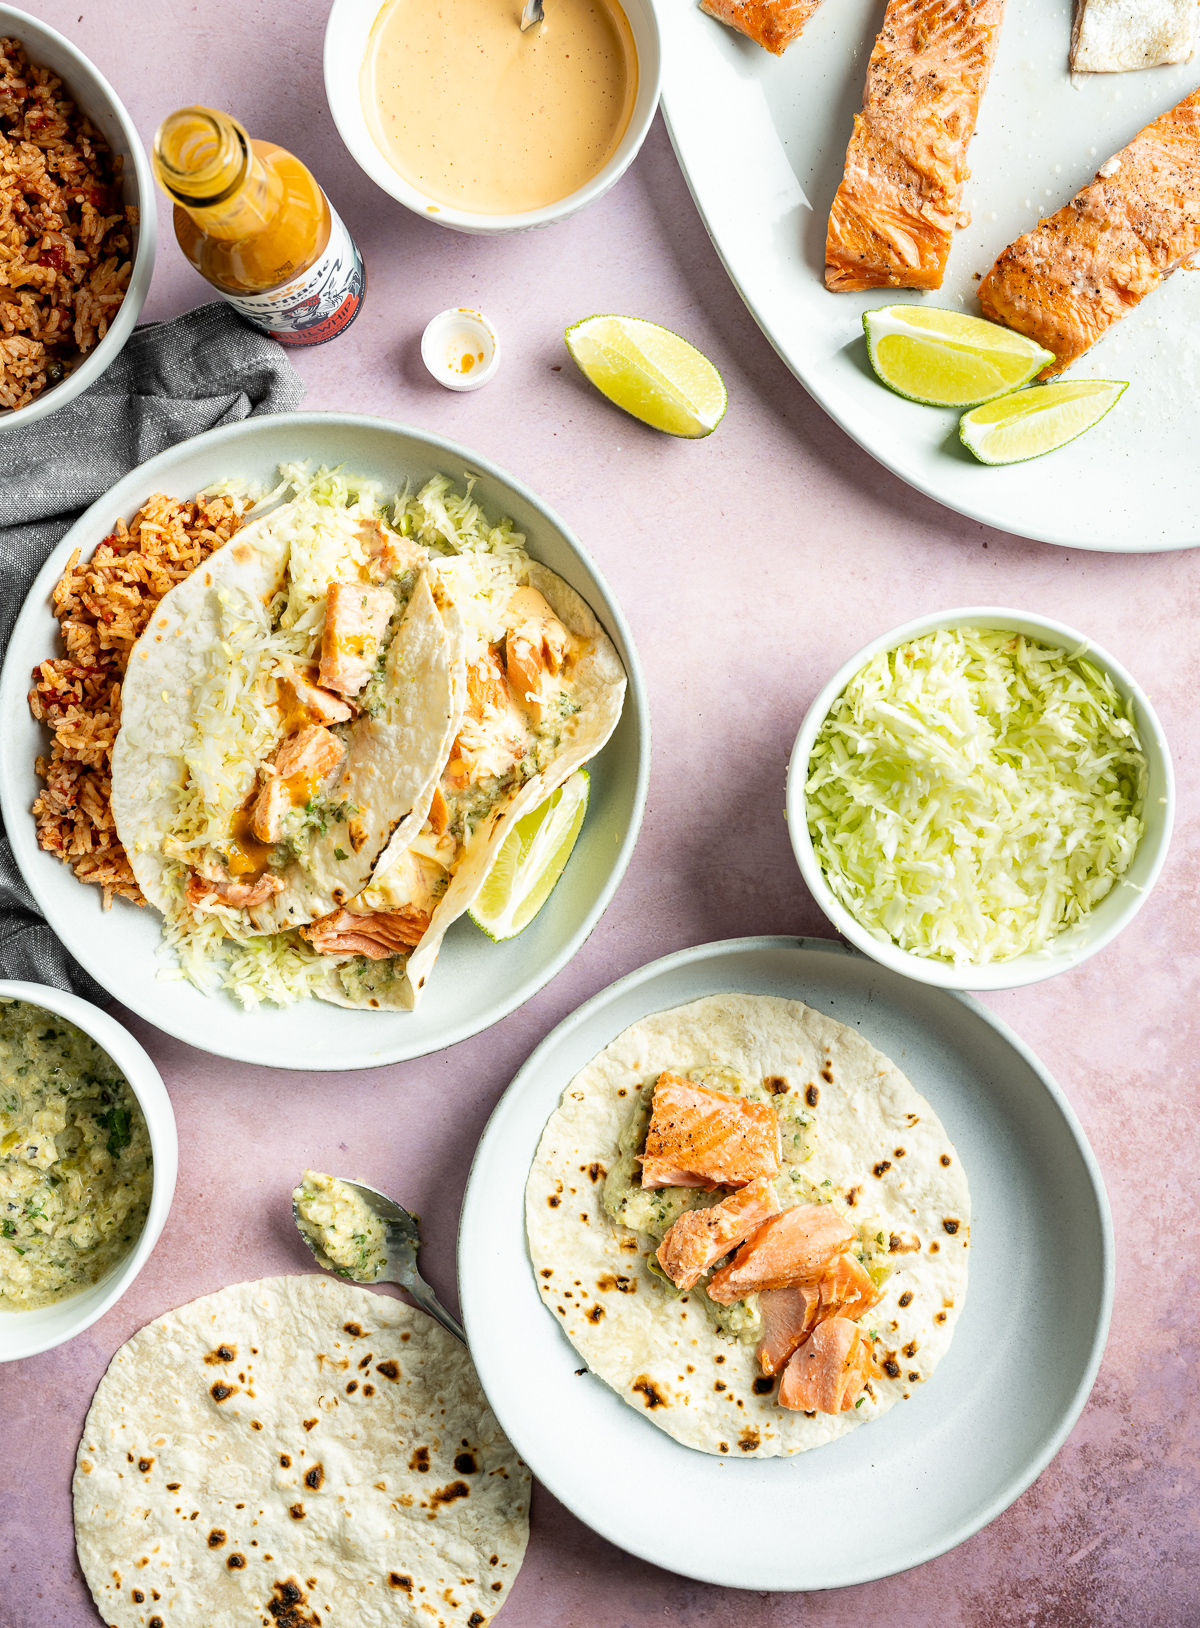 two plates of salmon tacos on light blue plates bowl of rice bowl of shredded green cabbage platter of grilled salmon